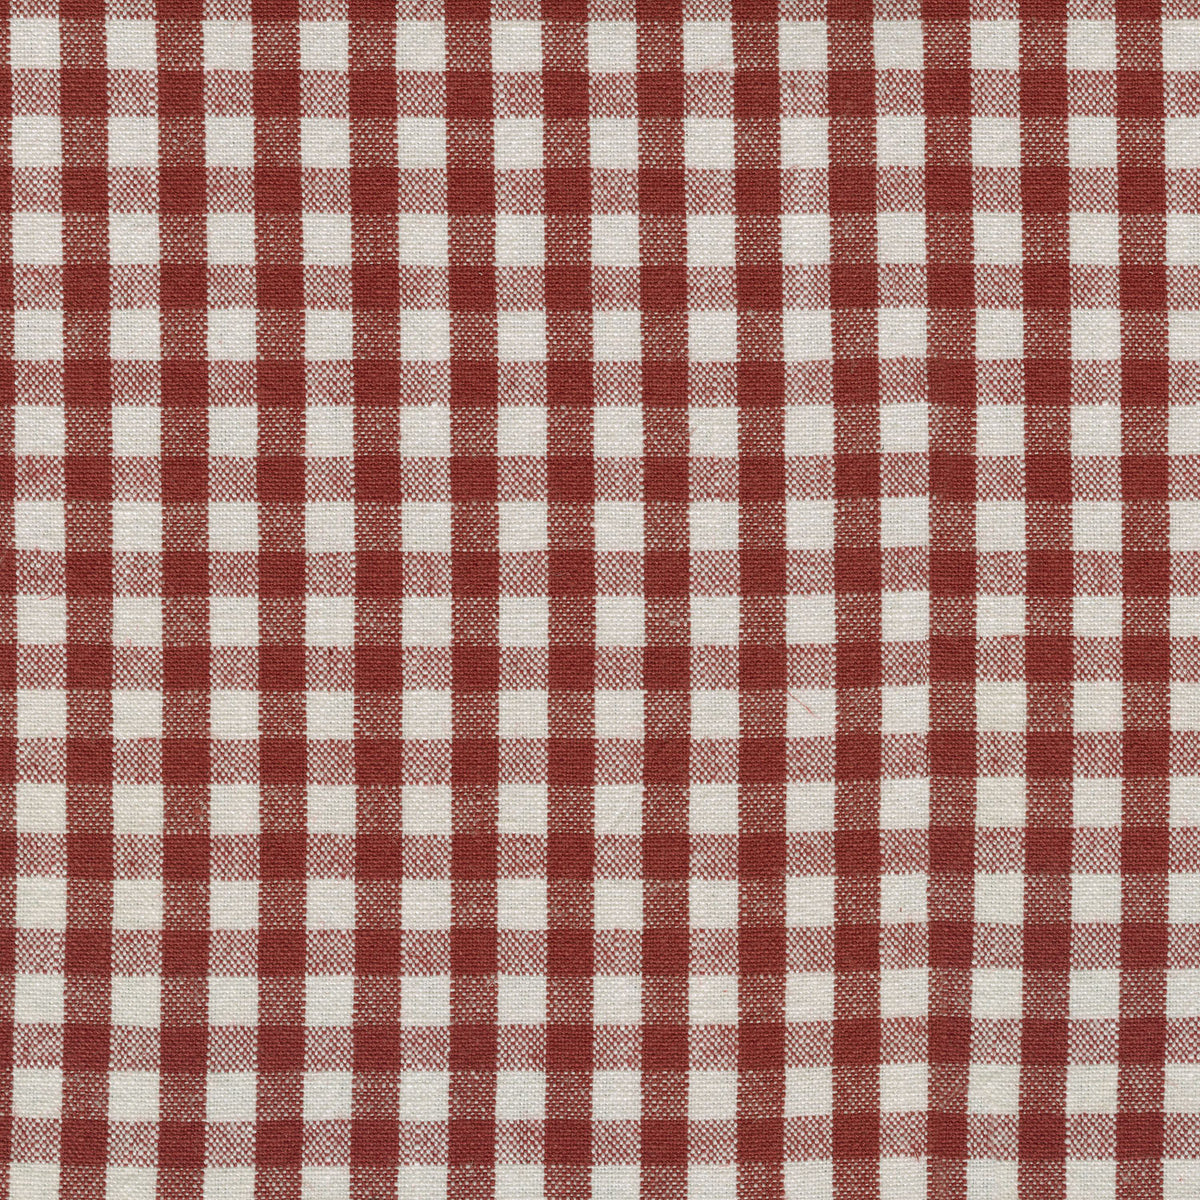 P/K Lifestyles Logan Check - Peppermint 408901 Upholstery Fabric